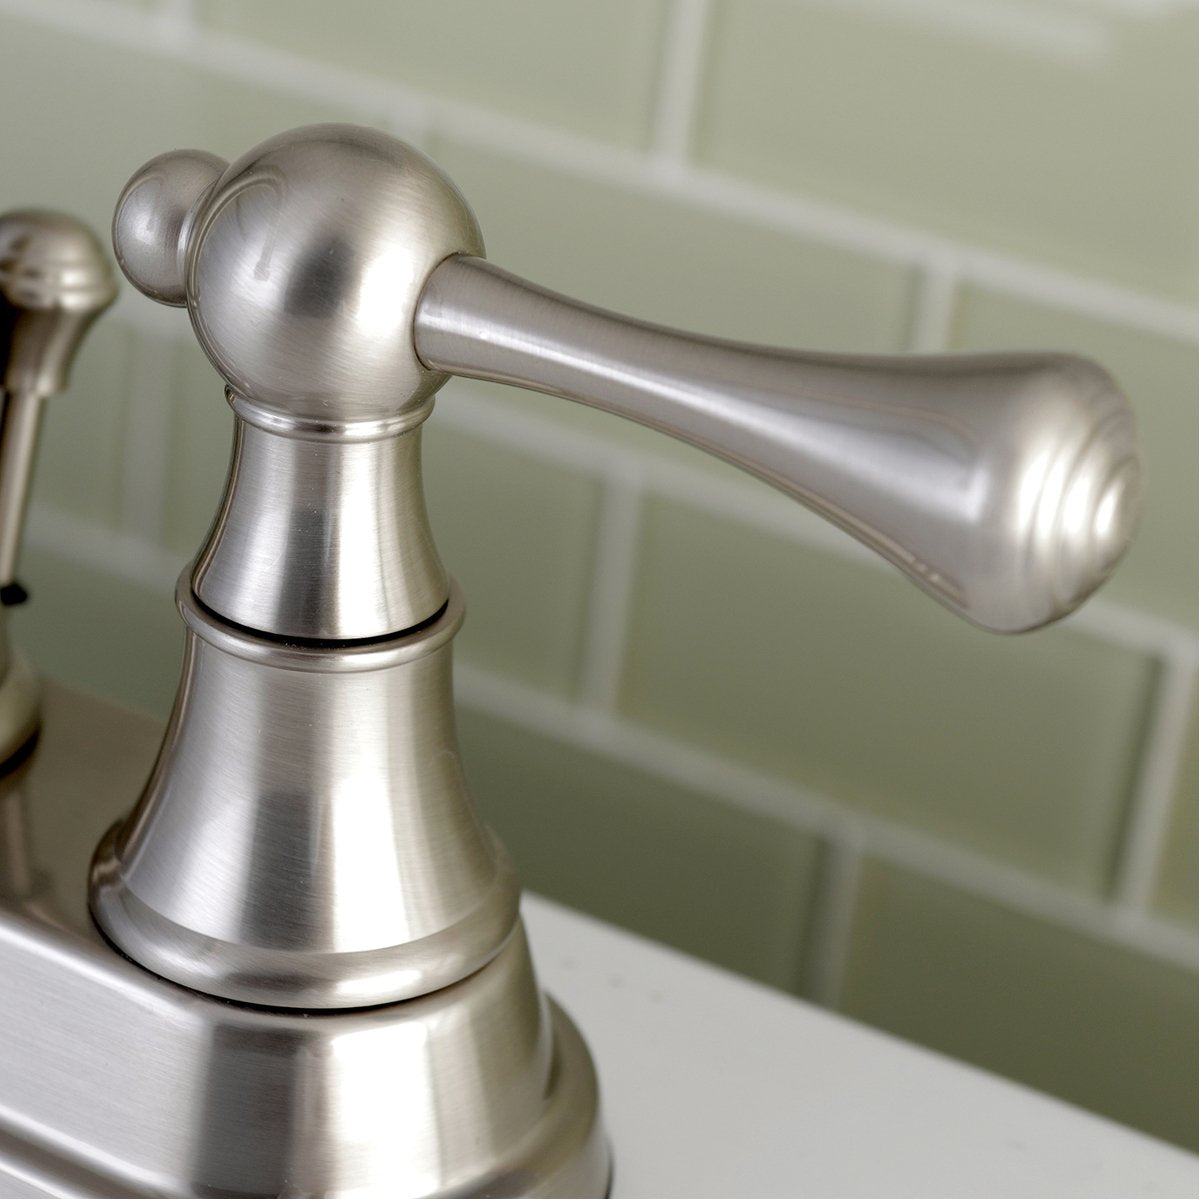 Kingston Brass English Country 4-Inch Centerset Bathroom Faucet